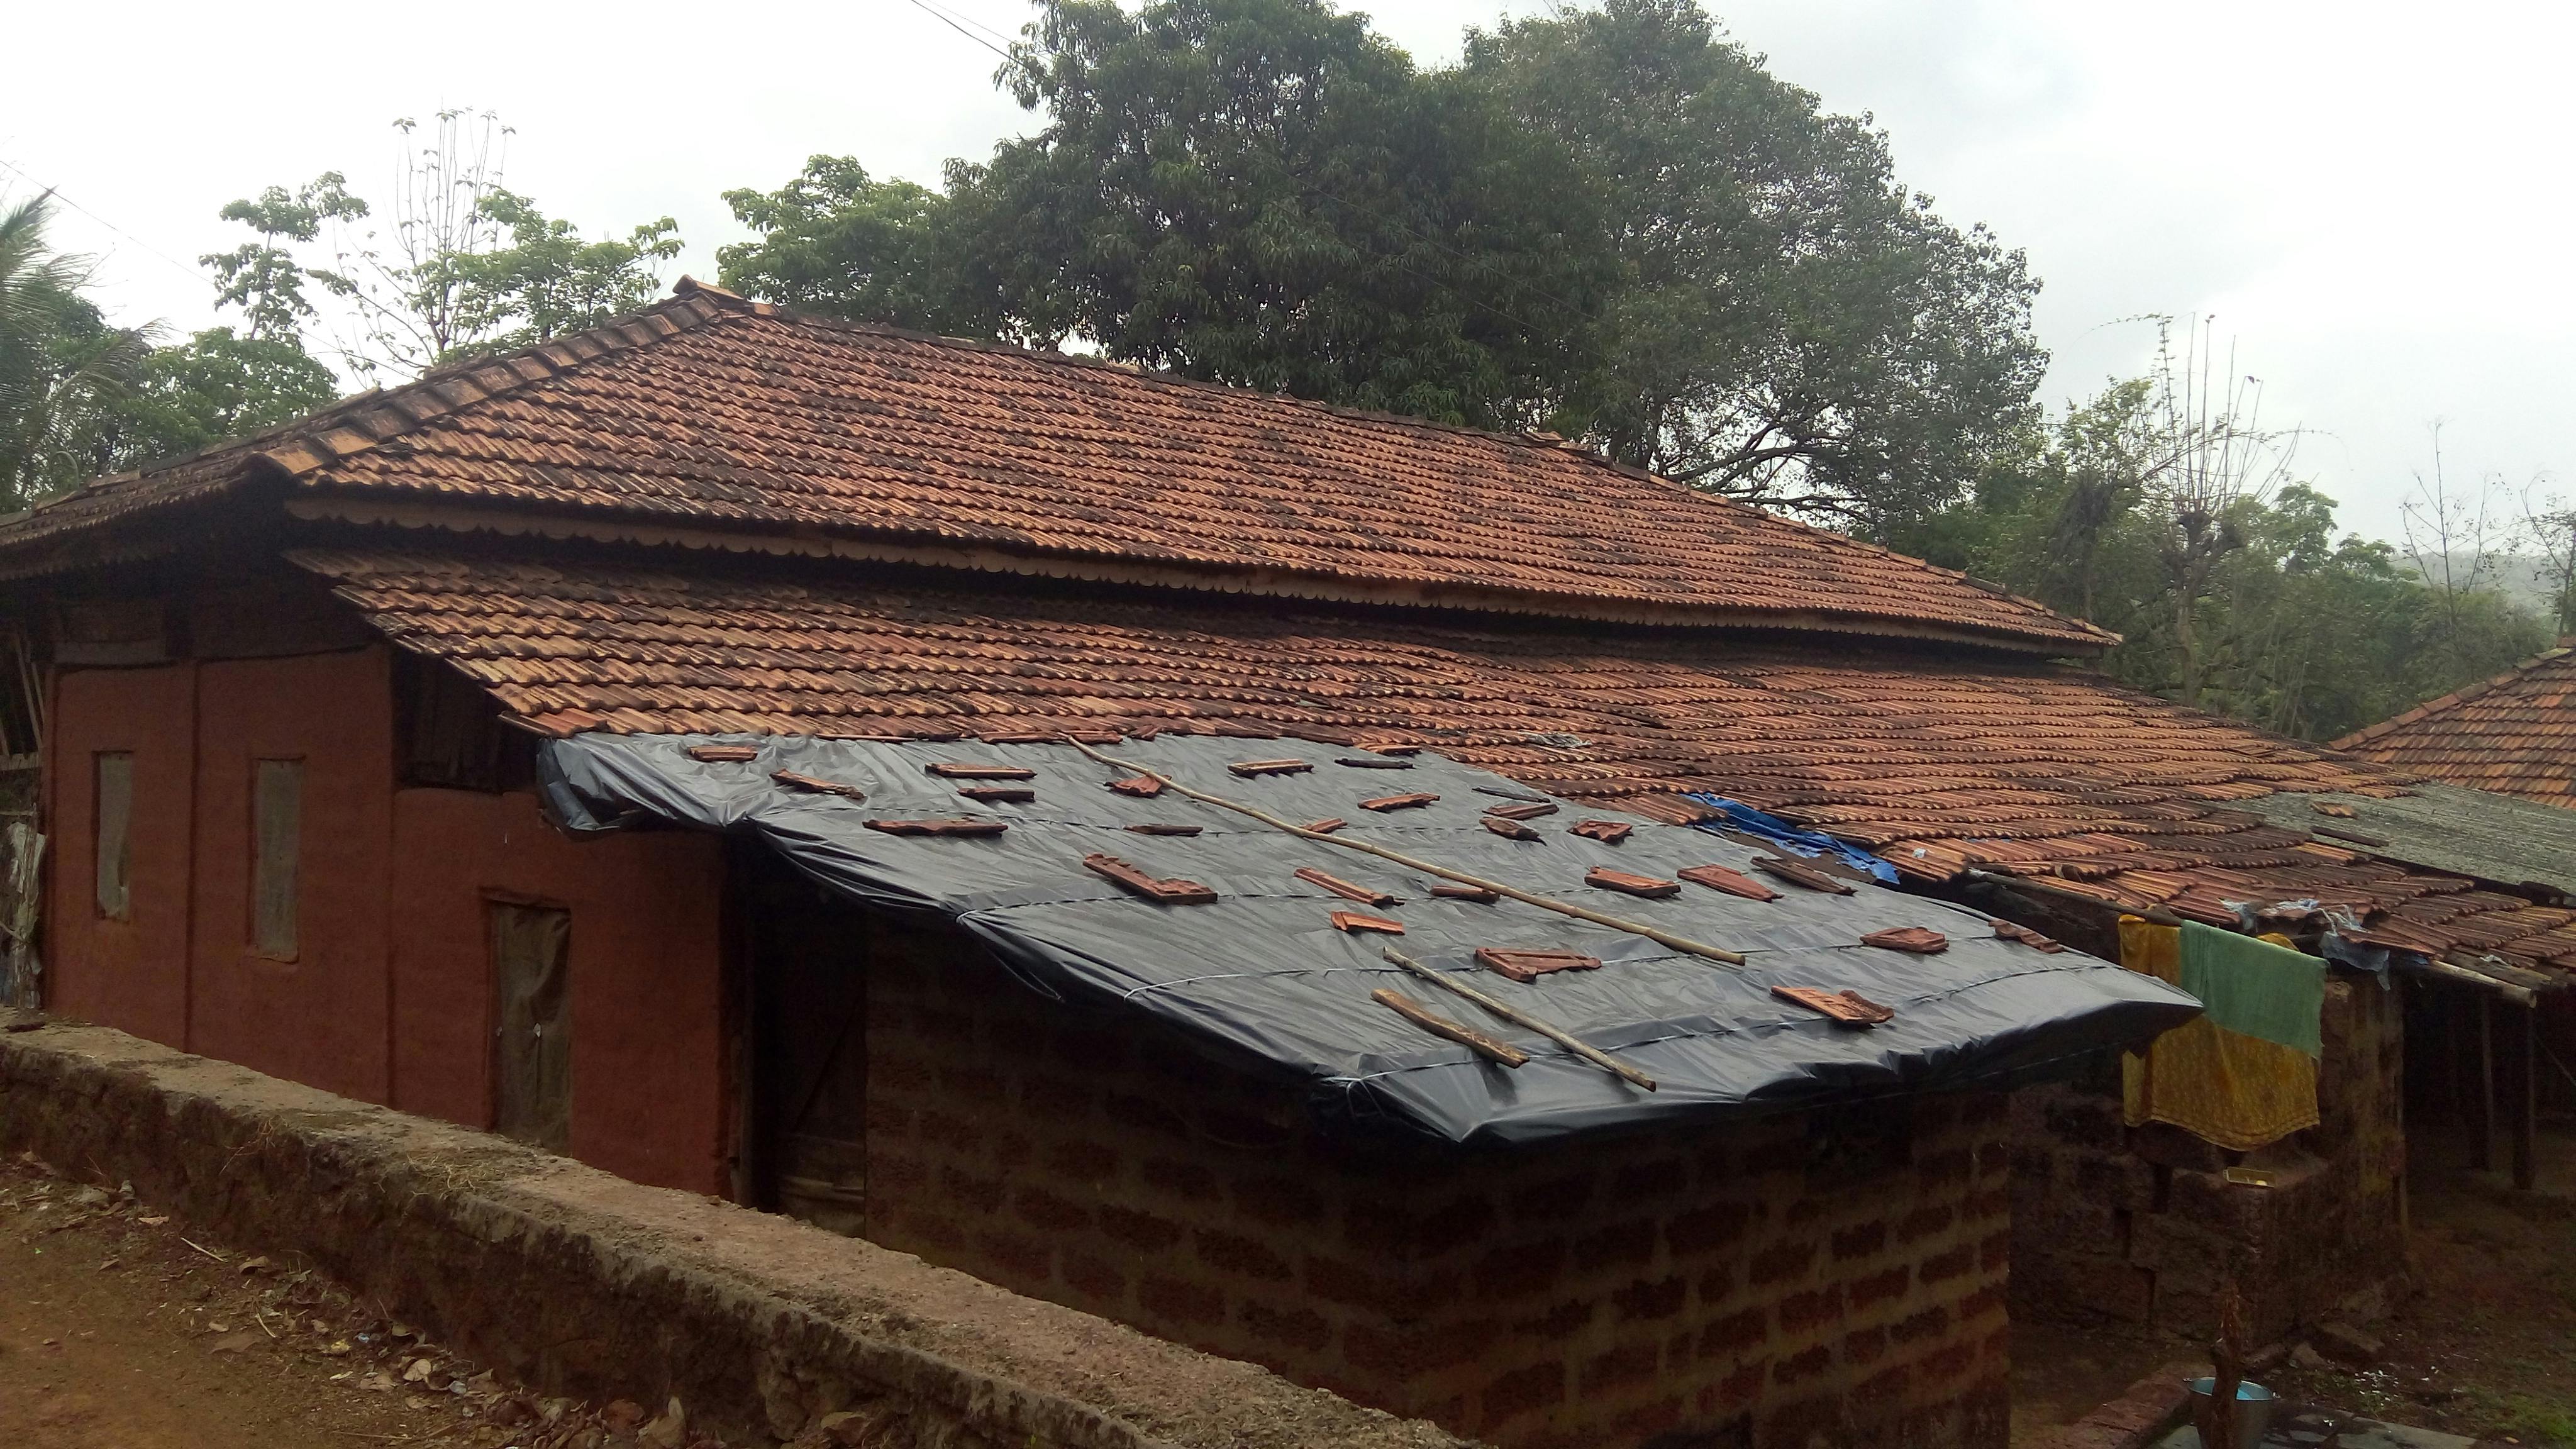 Free stock photo of Indian village home, Mangalore tiles, rooftop